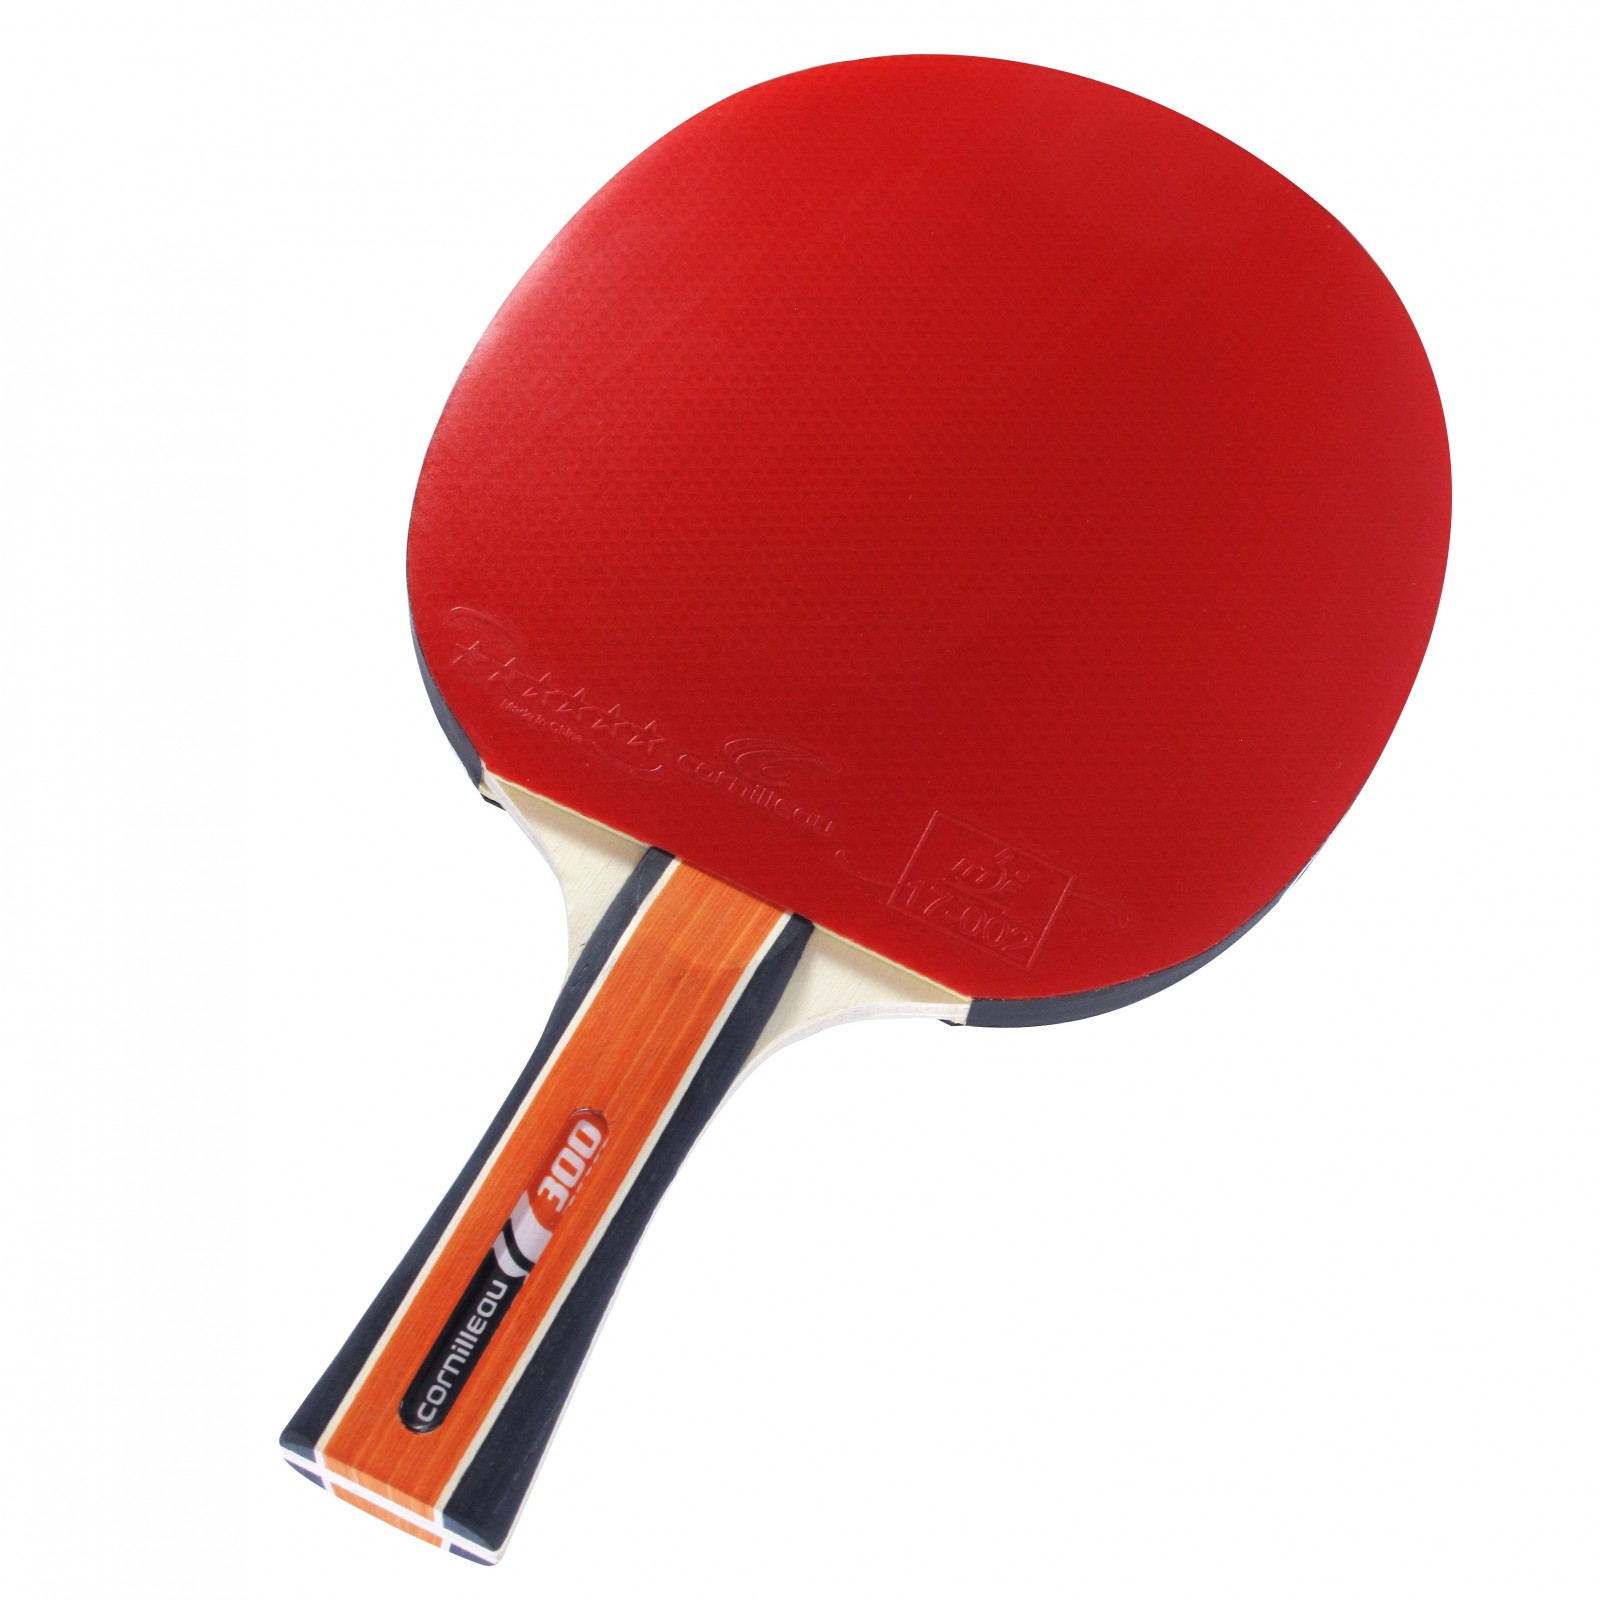 Sport 300 Table tennis paddle - Cornilleau - Ping Pong